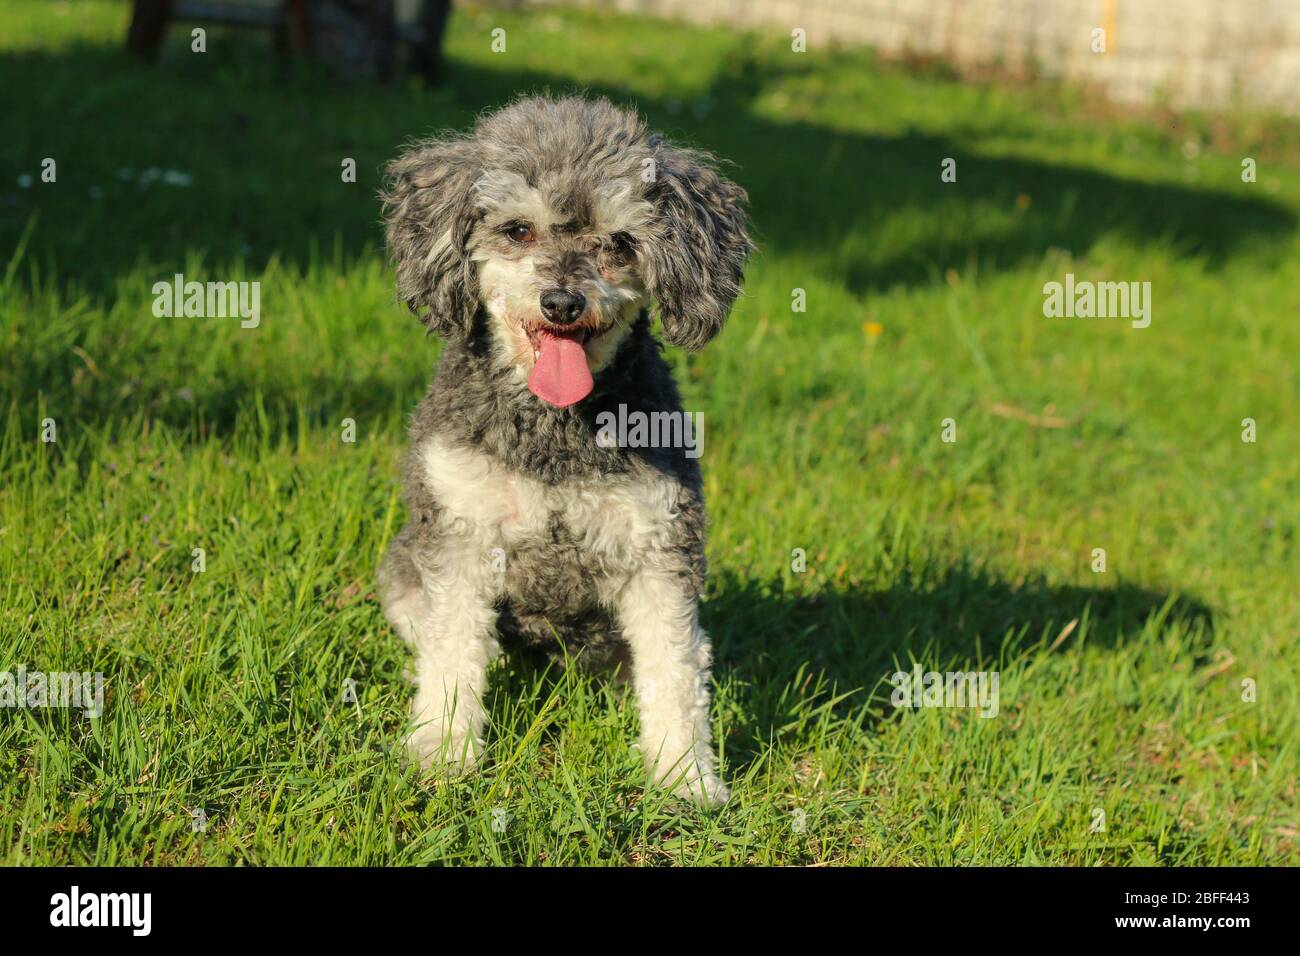 The portrait picture of the cute curly dog. It is a cross breed of poodle and shi tzu. Stock Photo